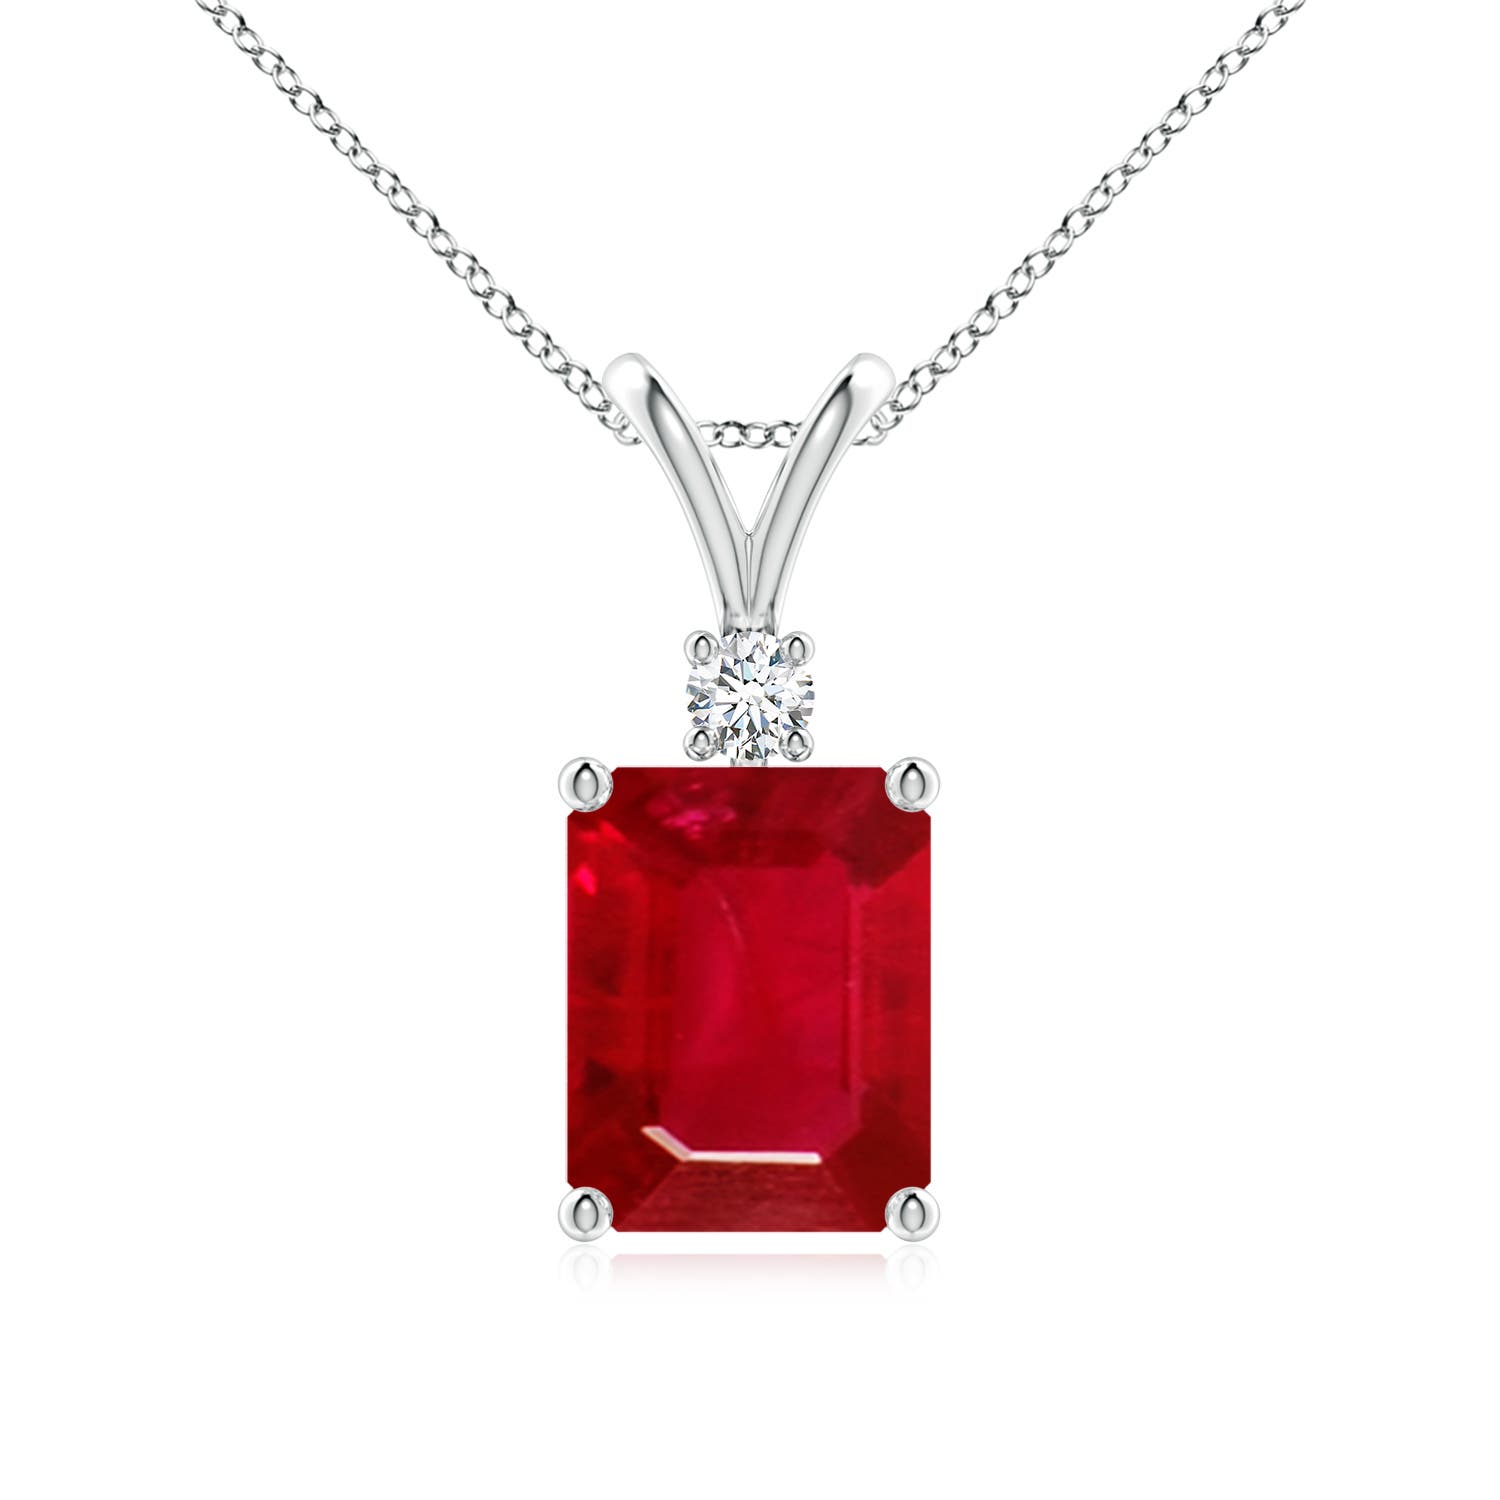 AAA - Ruby / 3.07 CT / 14 KT White Gold